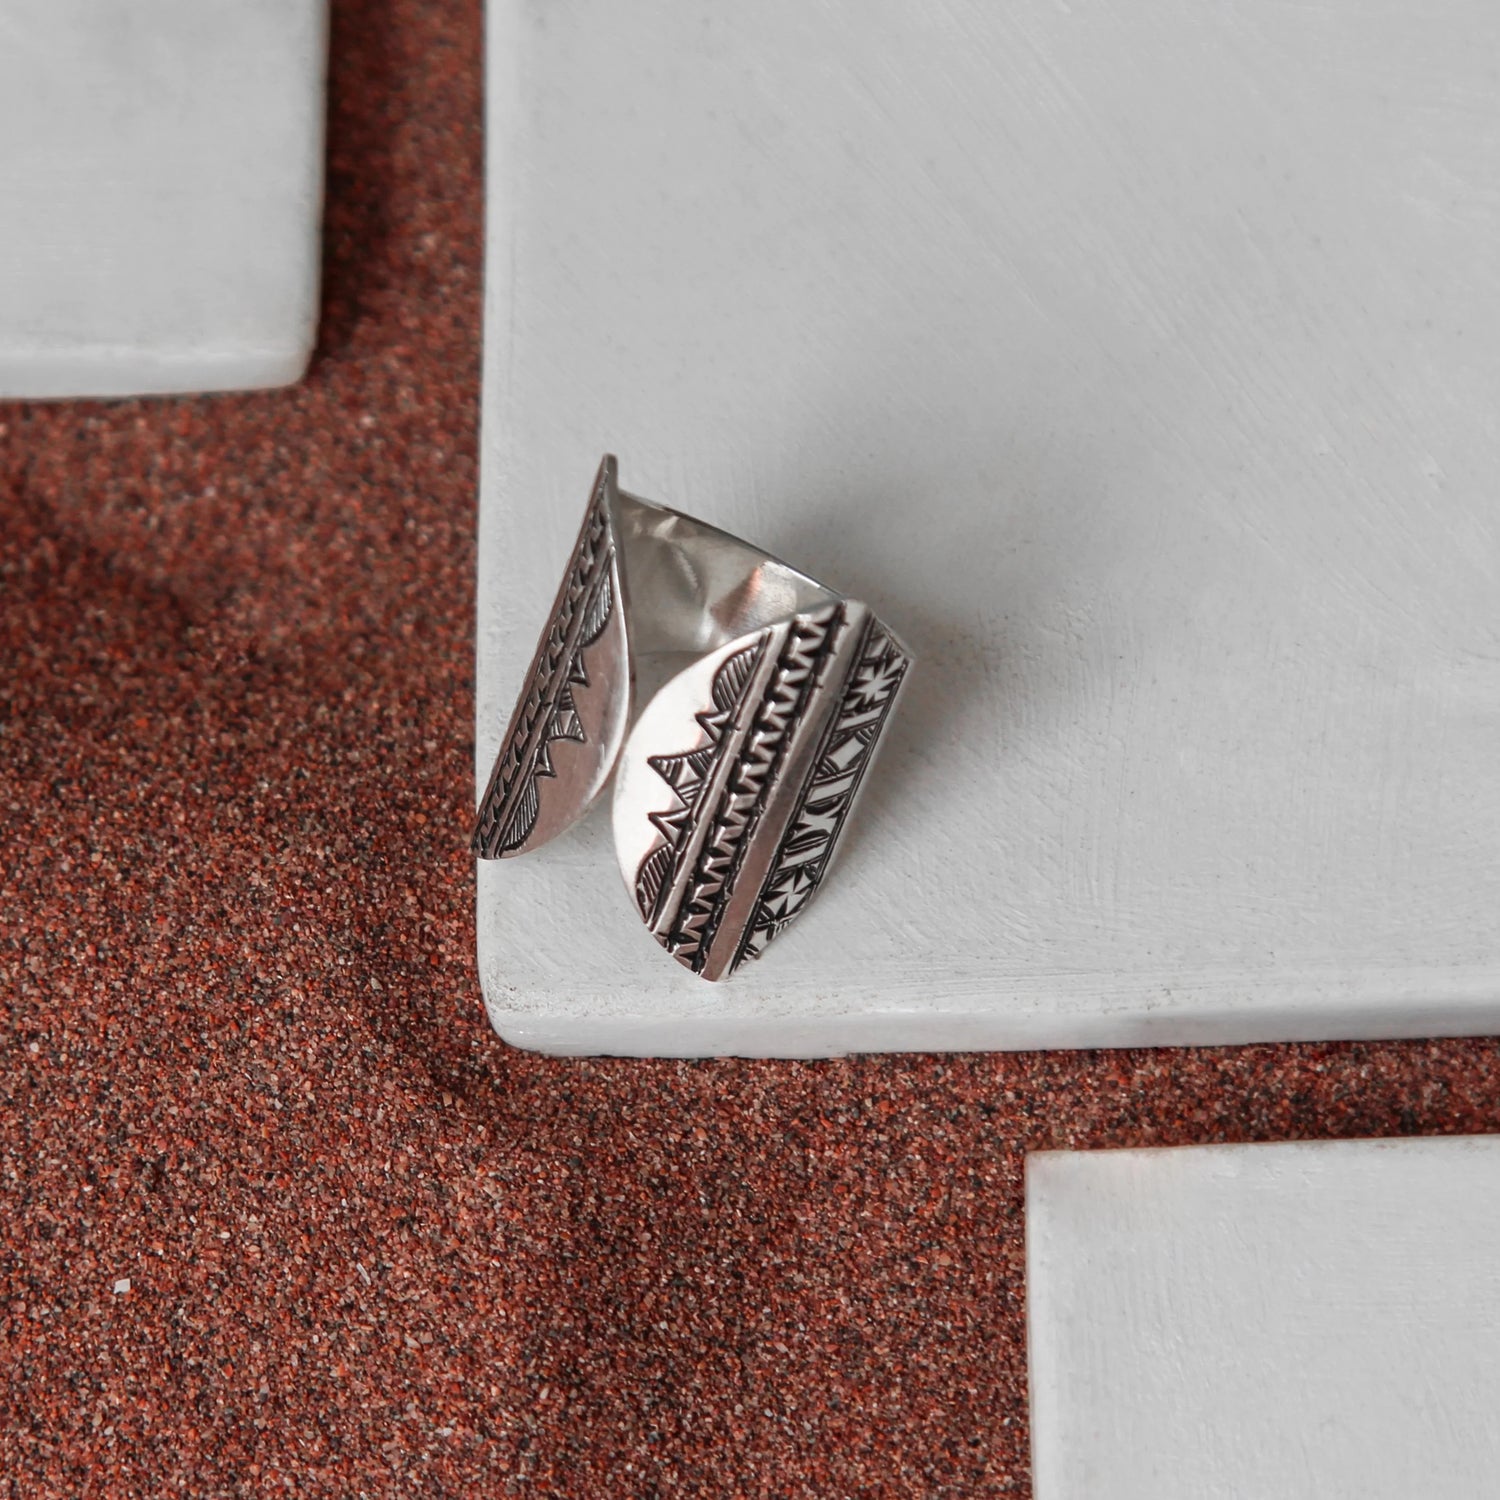 Artistic expression: The handmade Amazigh Grey Window Ring by Jelli Jewels brand is a beautiful display of artistic expression, reflecting the creativity and craftsmanship of Amazigh jewelry traditions.